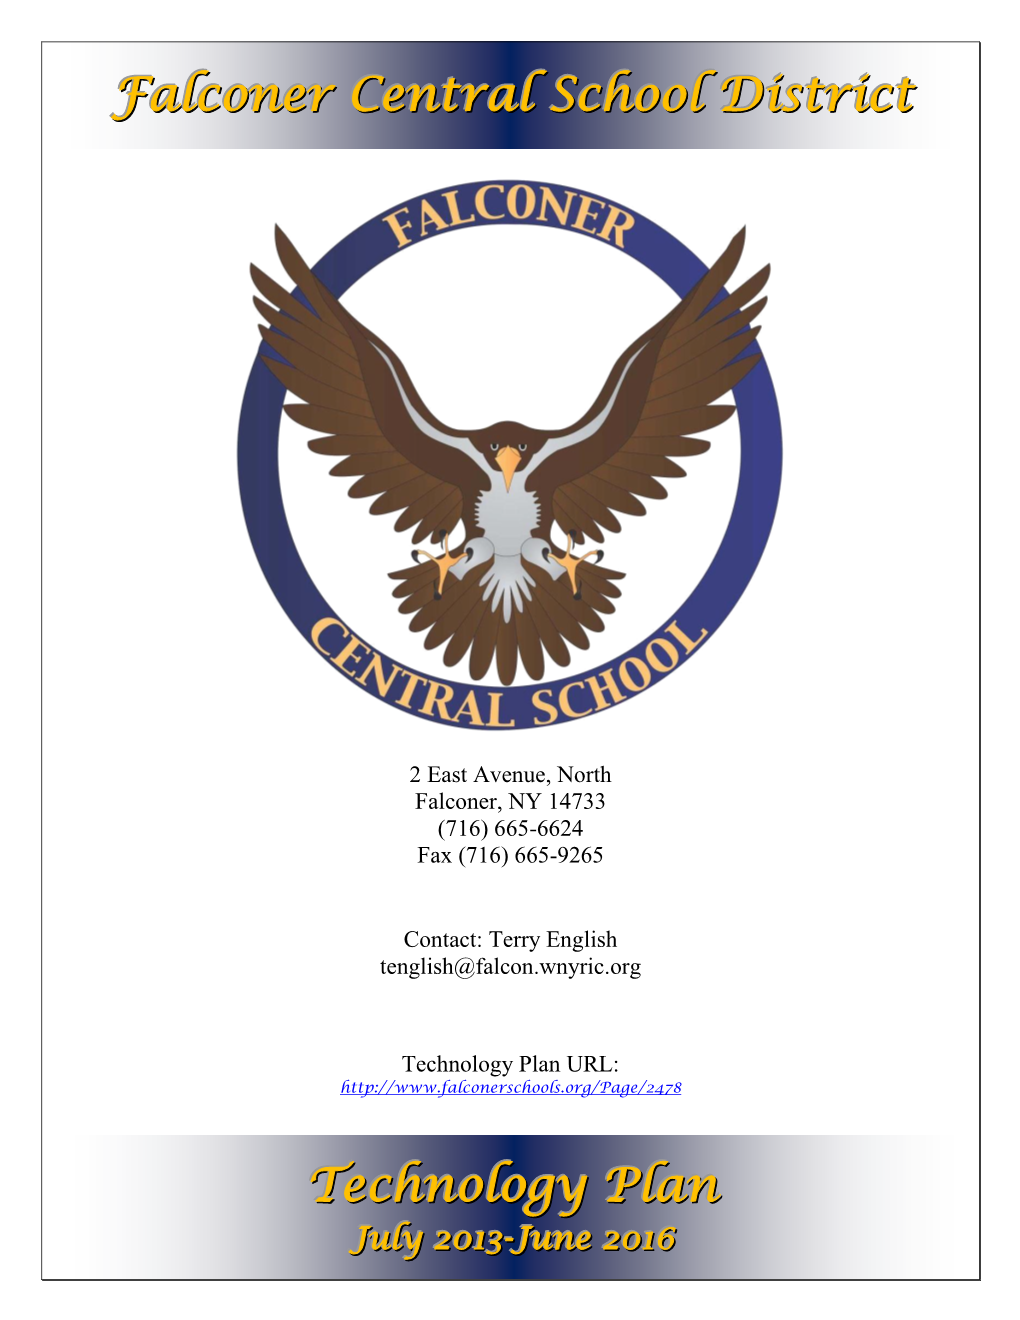 Falconer Central School District Technology Plan